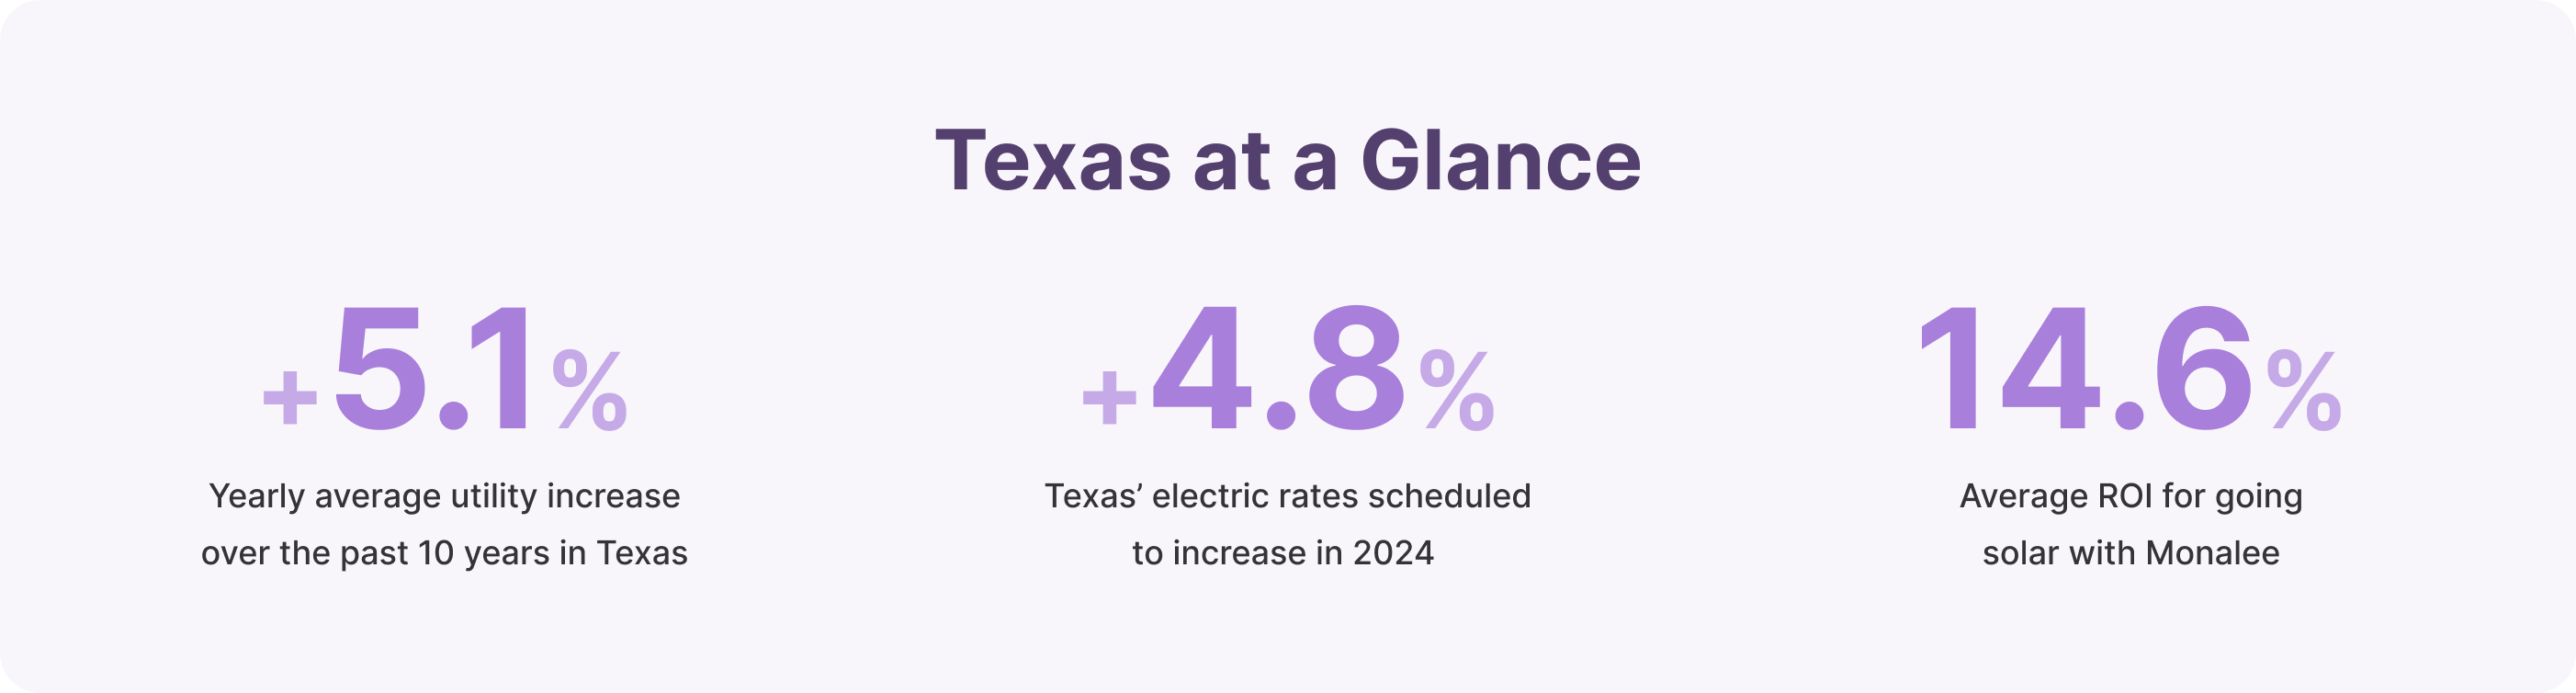 Energy savings data for the state of Texas